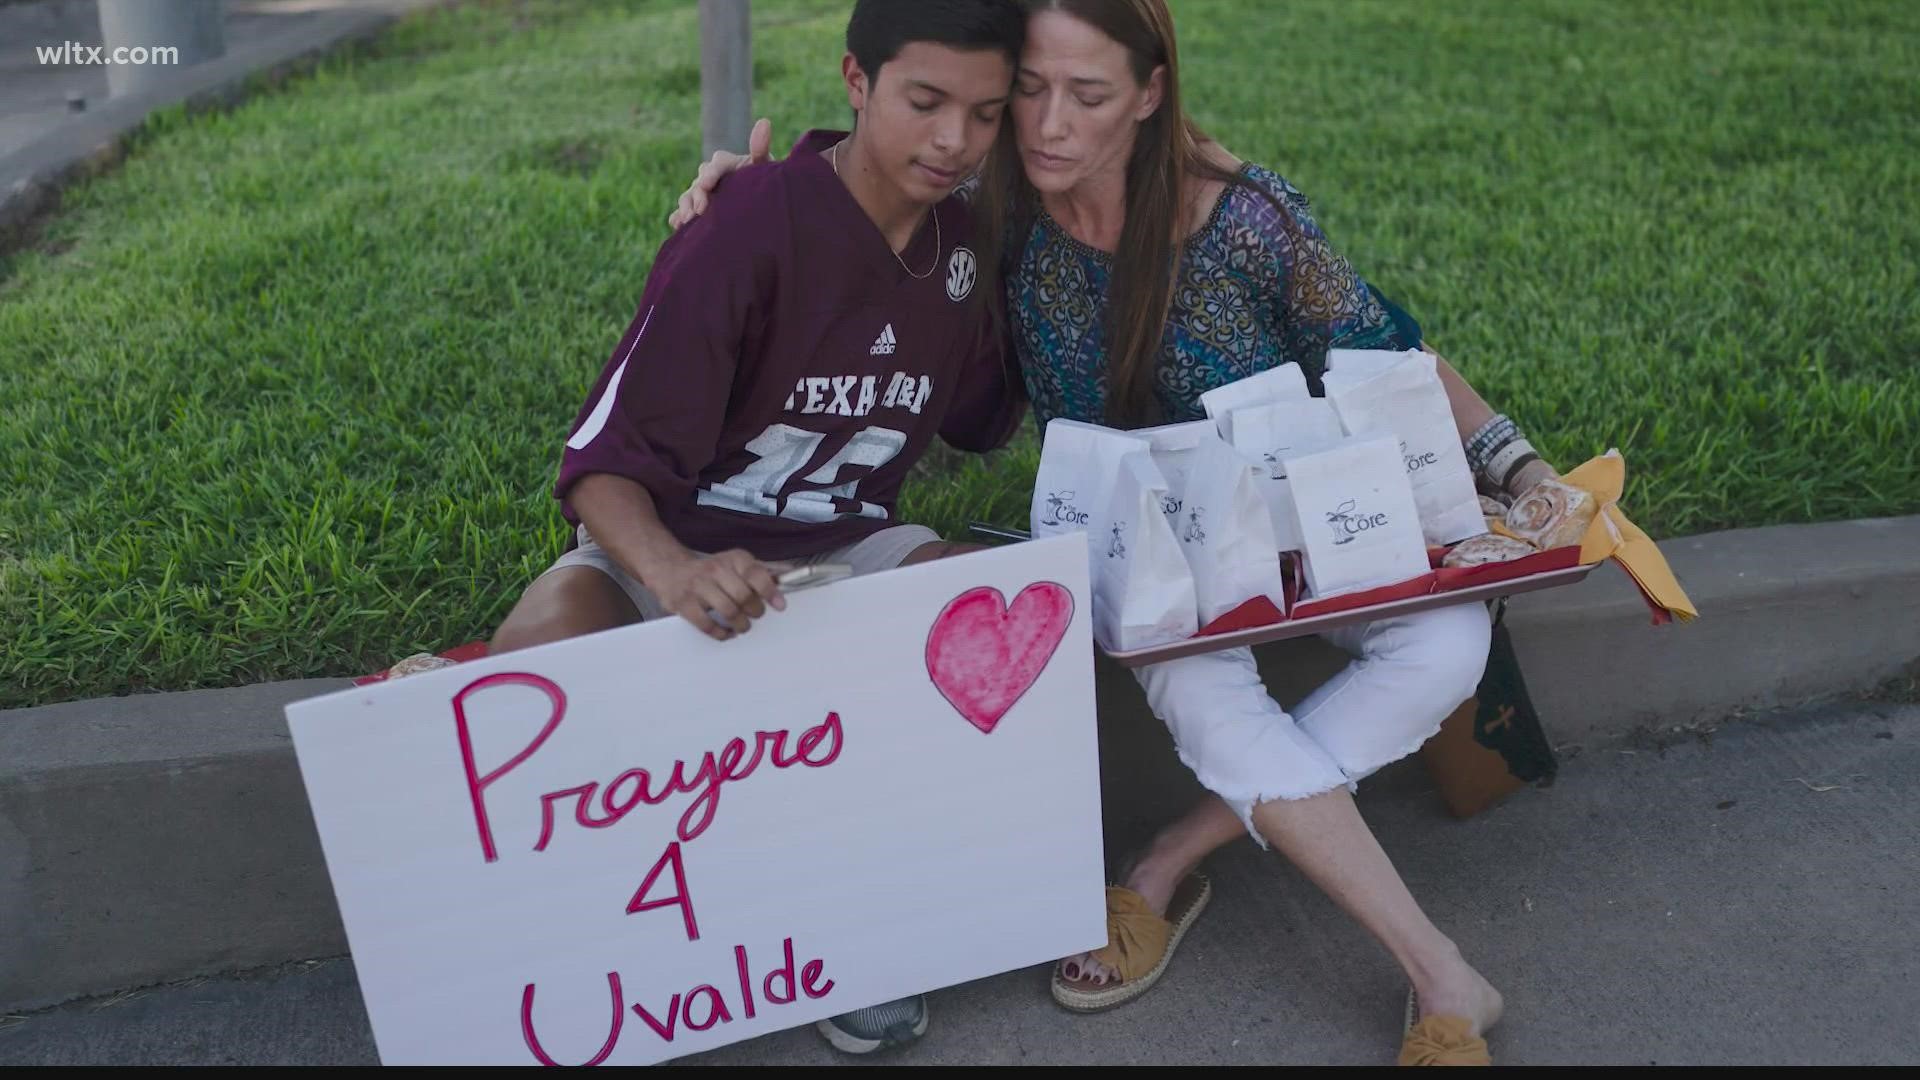 At least 21 people, including 19 children, were shot and killed at an elementary school in Uvalde, Texas, on Tuesday. Here's what we know so far.